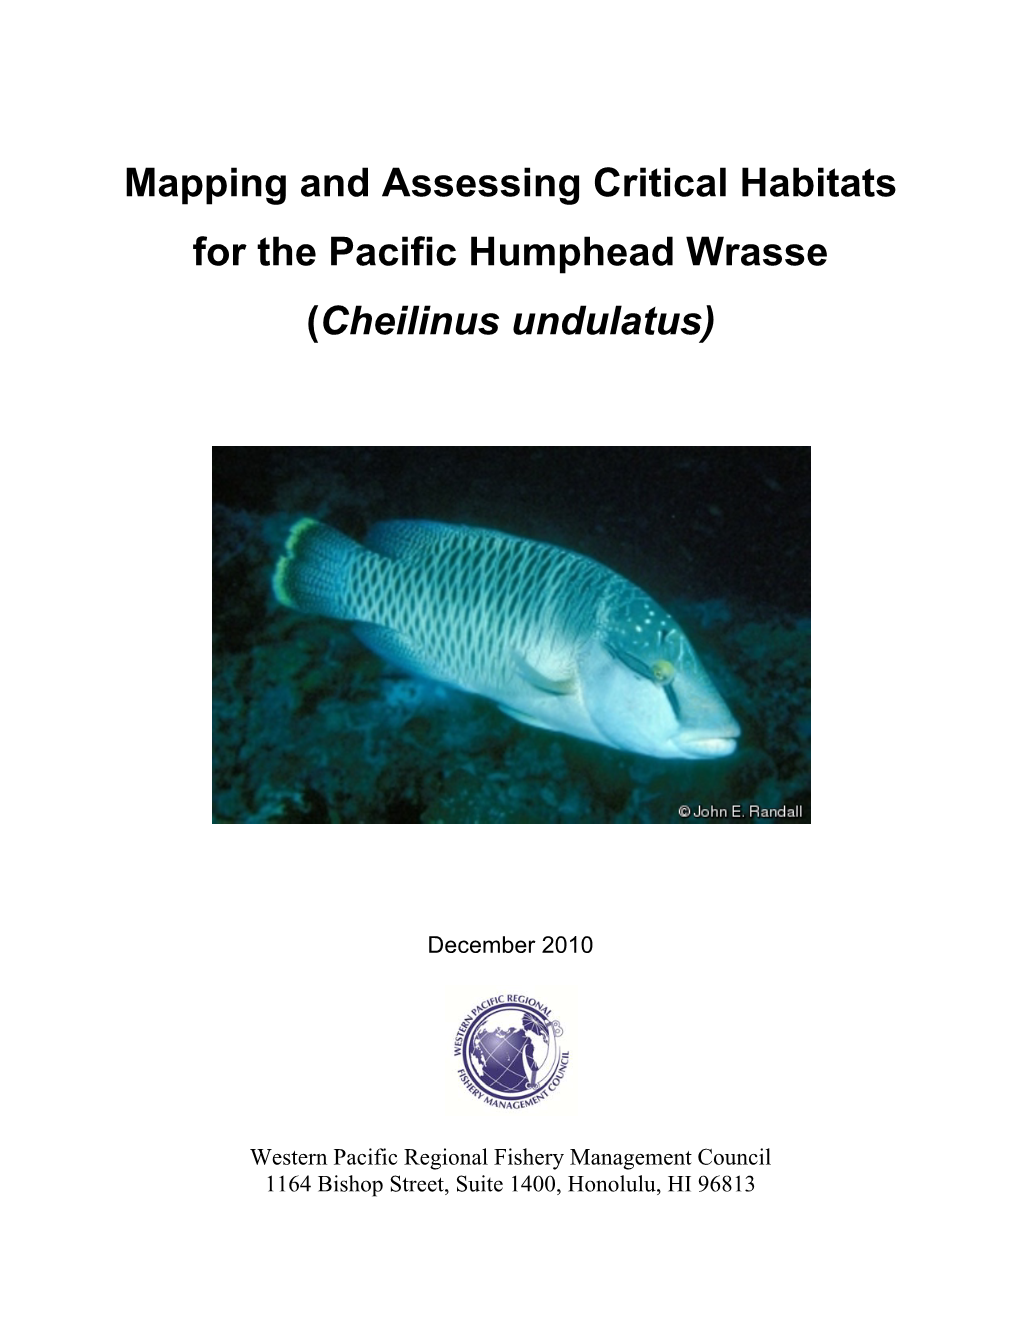 Mapping and Assessing Critical Habitats for the Pacific Humphead Wrasse (Cheilinus Undulatus)